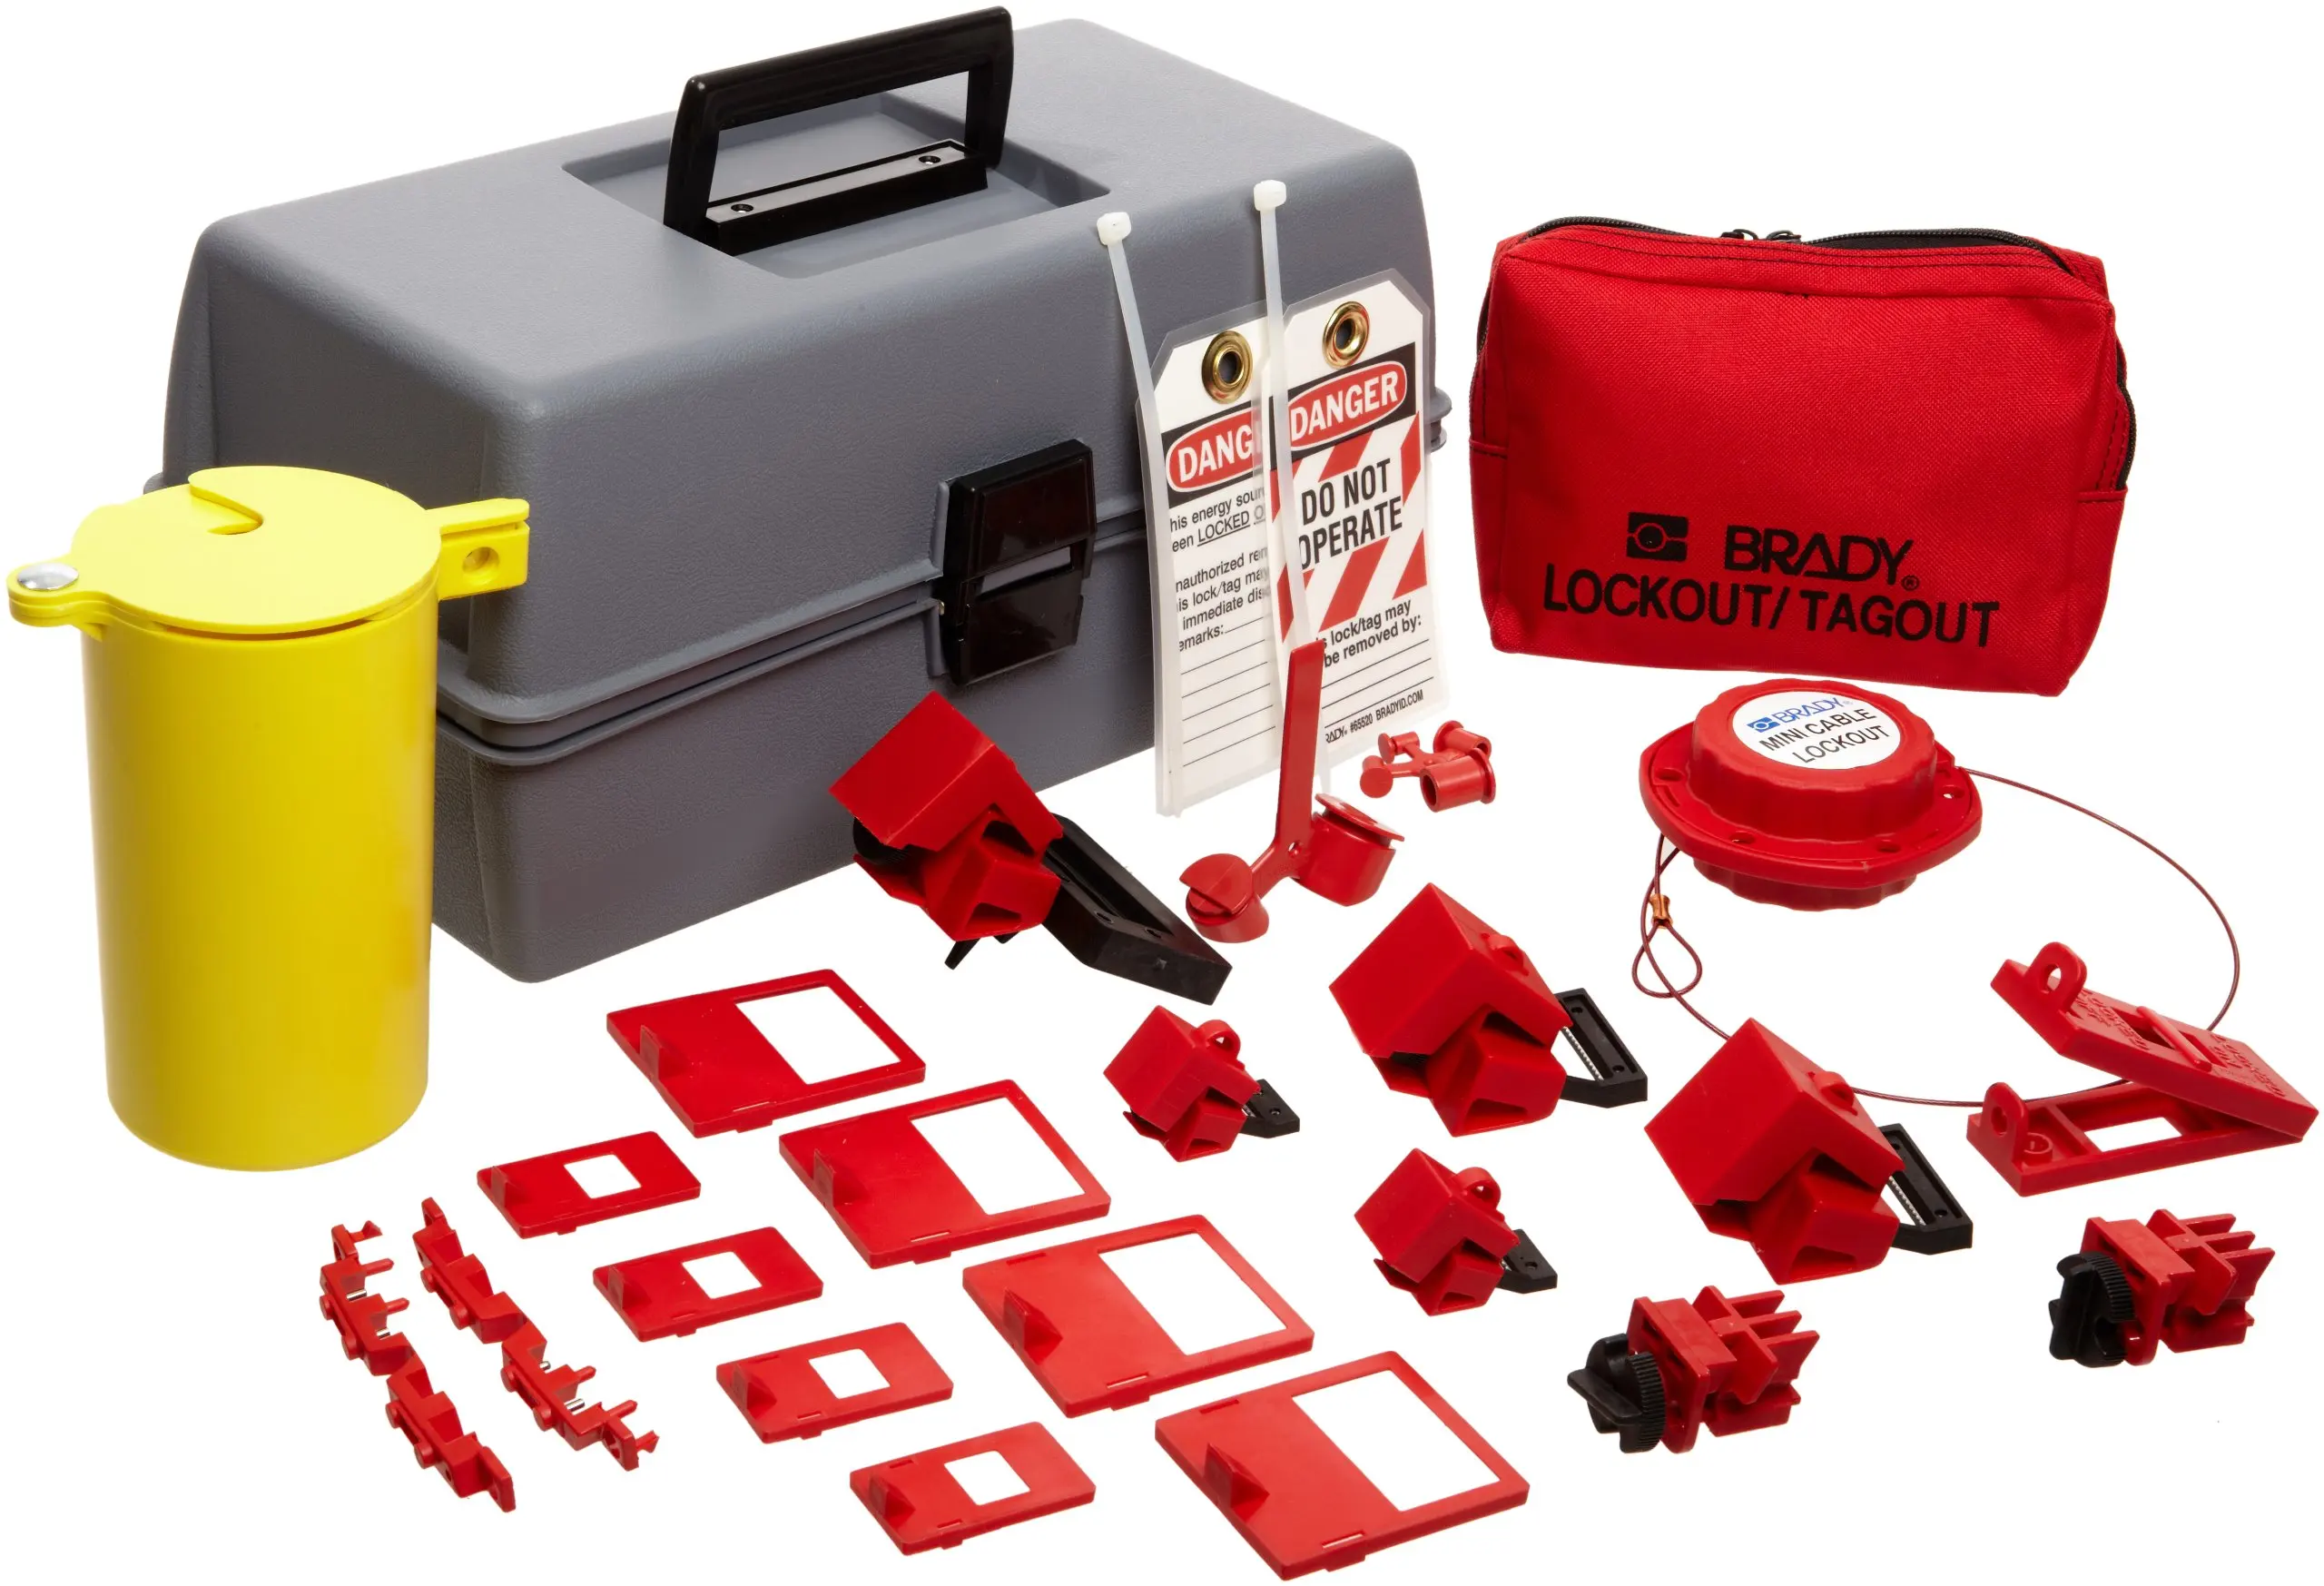 ABUS K Safety Lockout Tagout Personal Toolbox Kit Tillescenter Kits Occupational Health